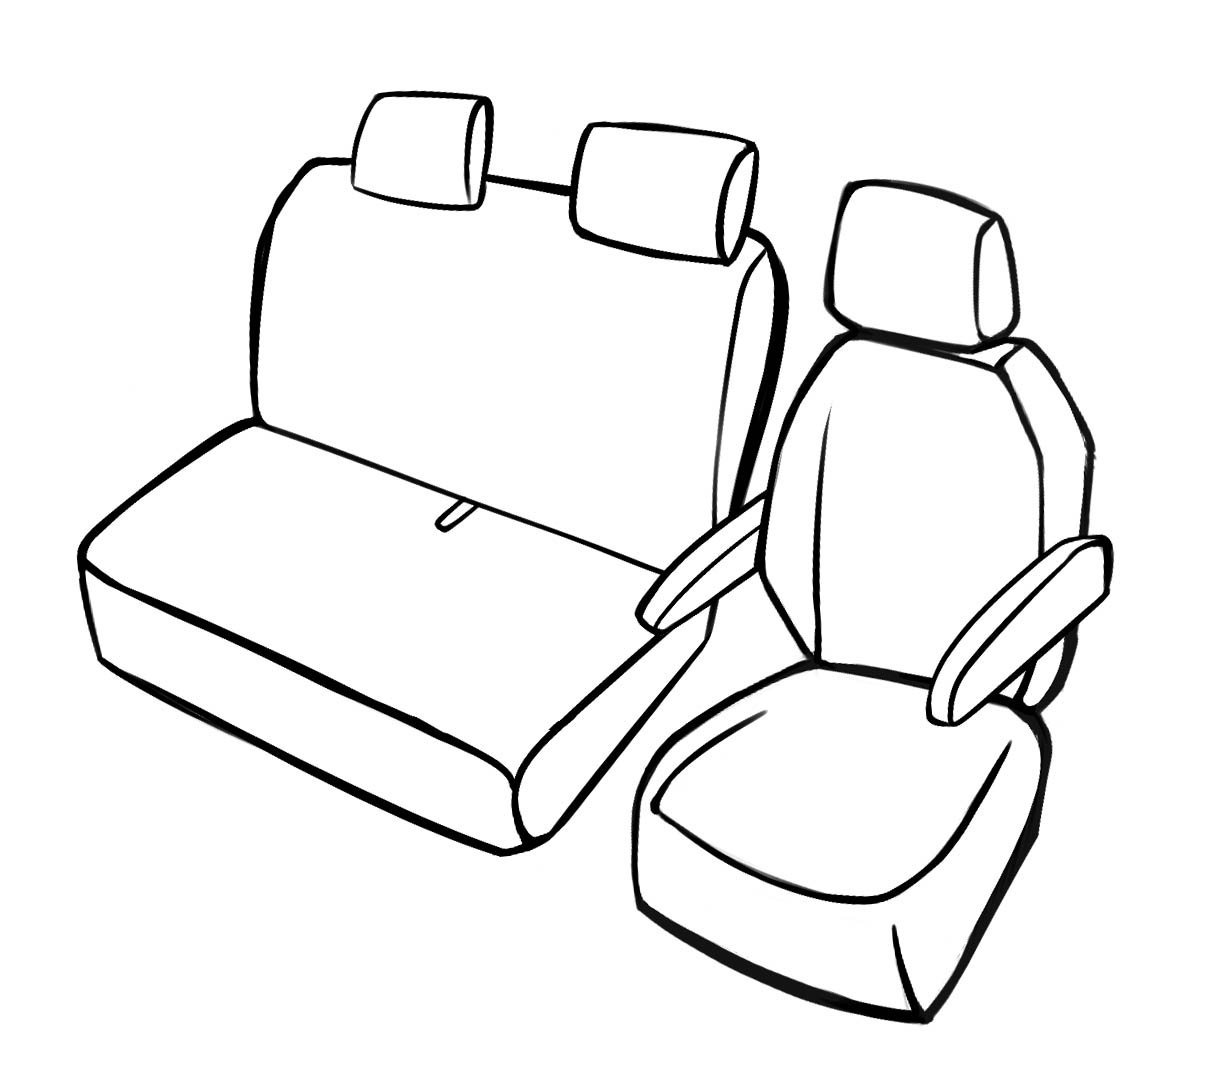 Premium Seat Cover for VW T5 2003 - 2015, 1 single seat cover front, 1 double bench cover